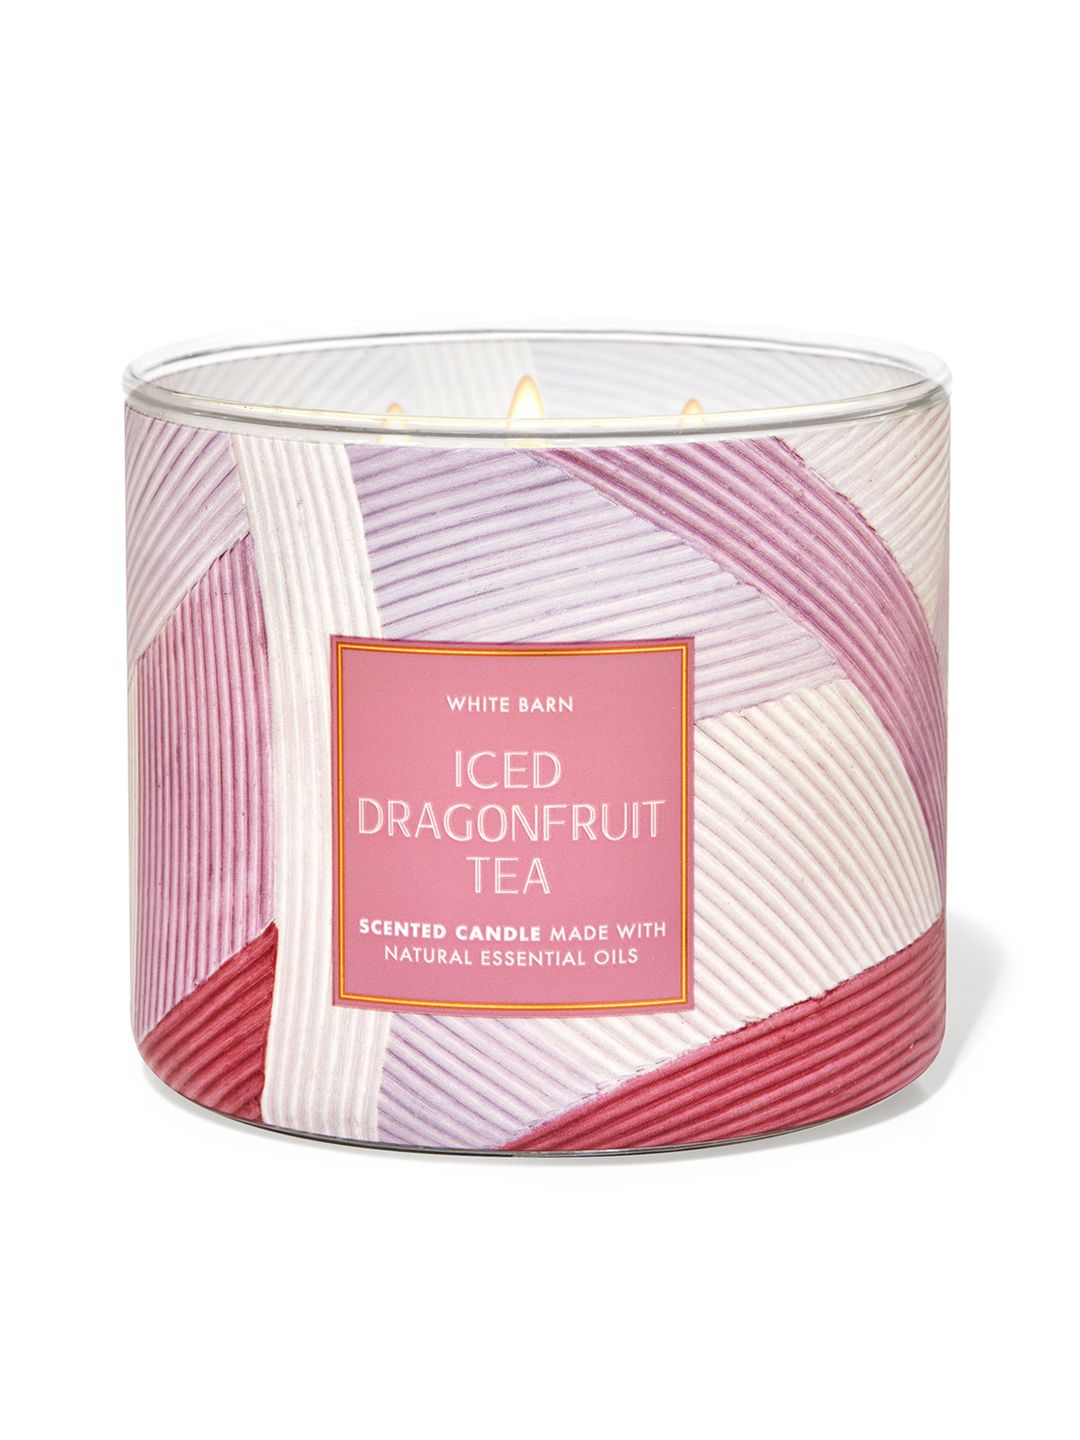 Bath & Body Works Iced Dragonfruit Tea 3-Wick Scented Candle - 411 g Price in India